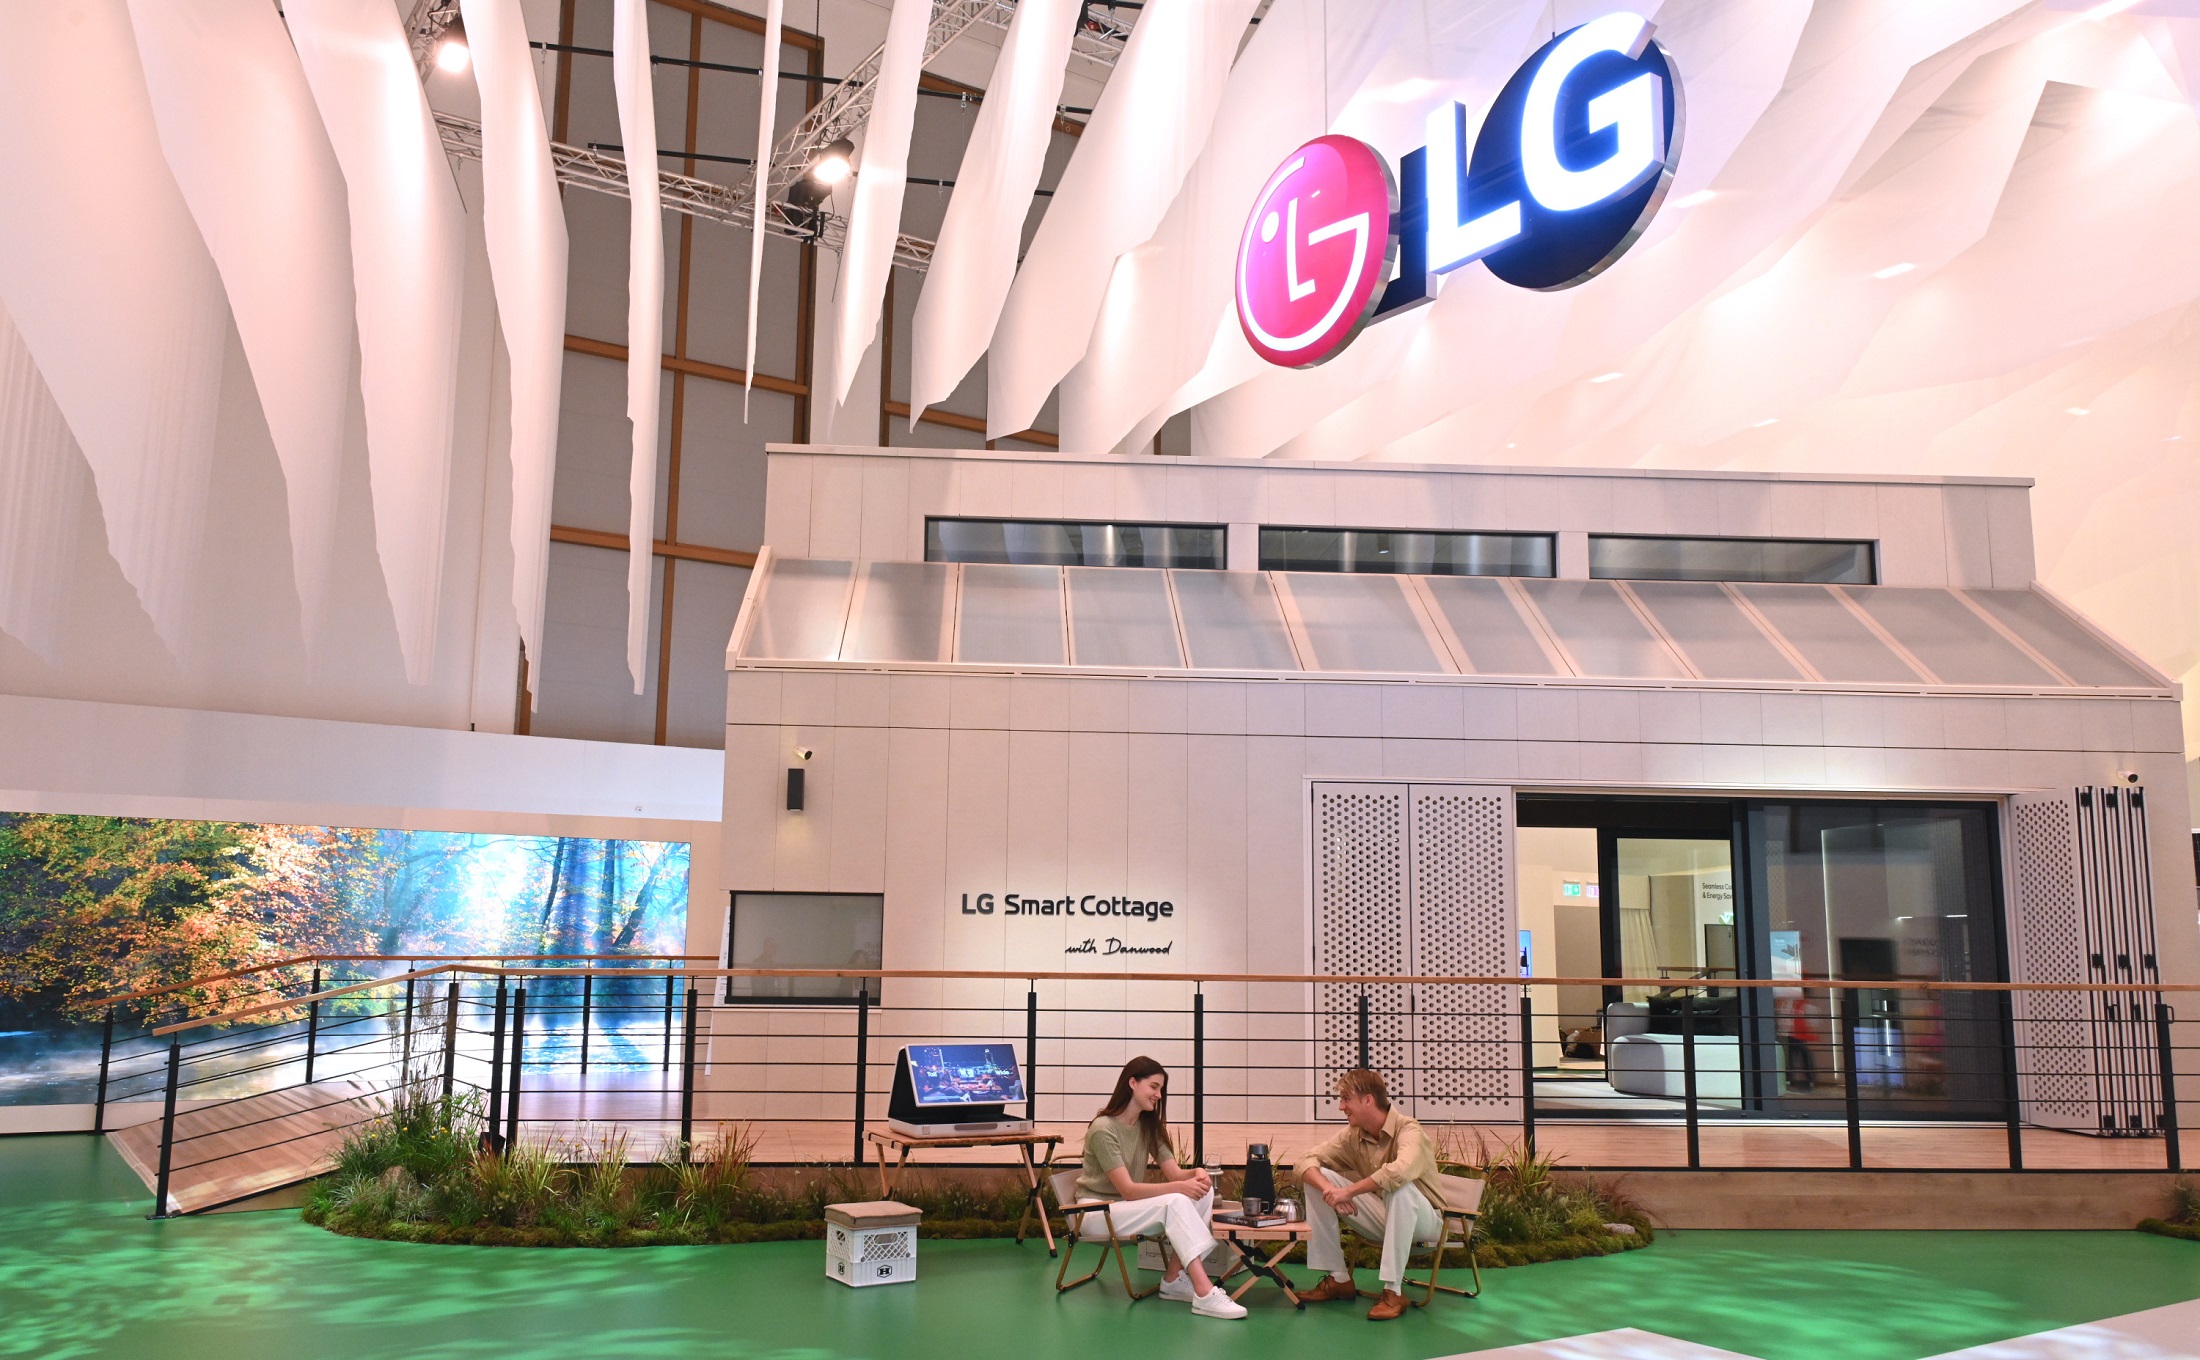 LG and future of Smart Living: Brand’s vision for smart living and role of technology in transforming homes